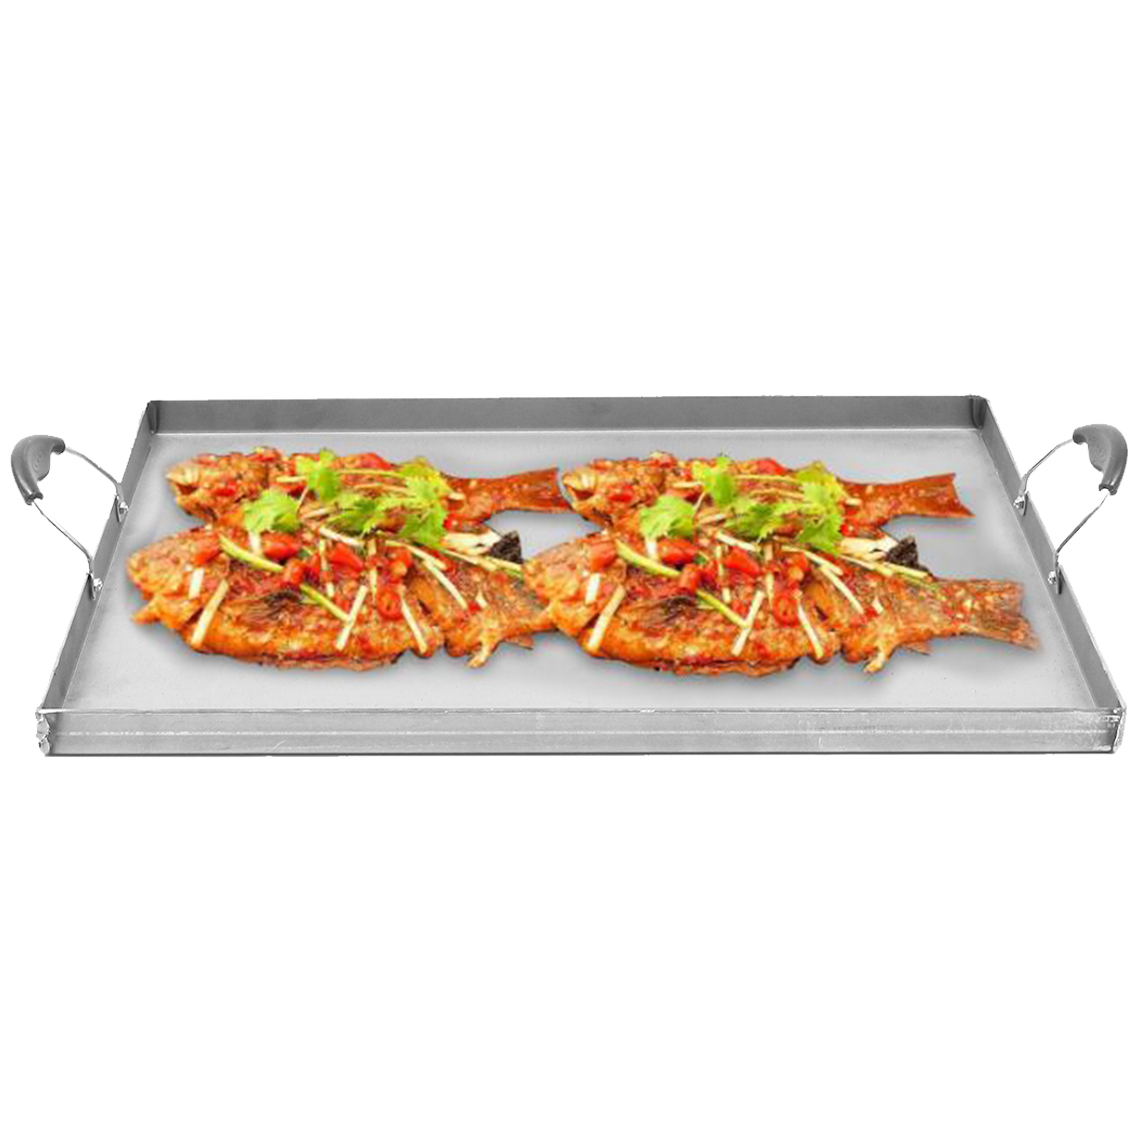 Stainless-Steel-Griddle-Flat-Top-Cooking-BBQ-Grill-Heat-Distribution-Stoves-1347971-5